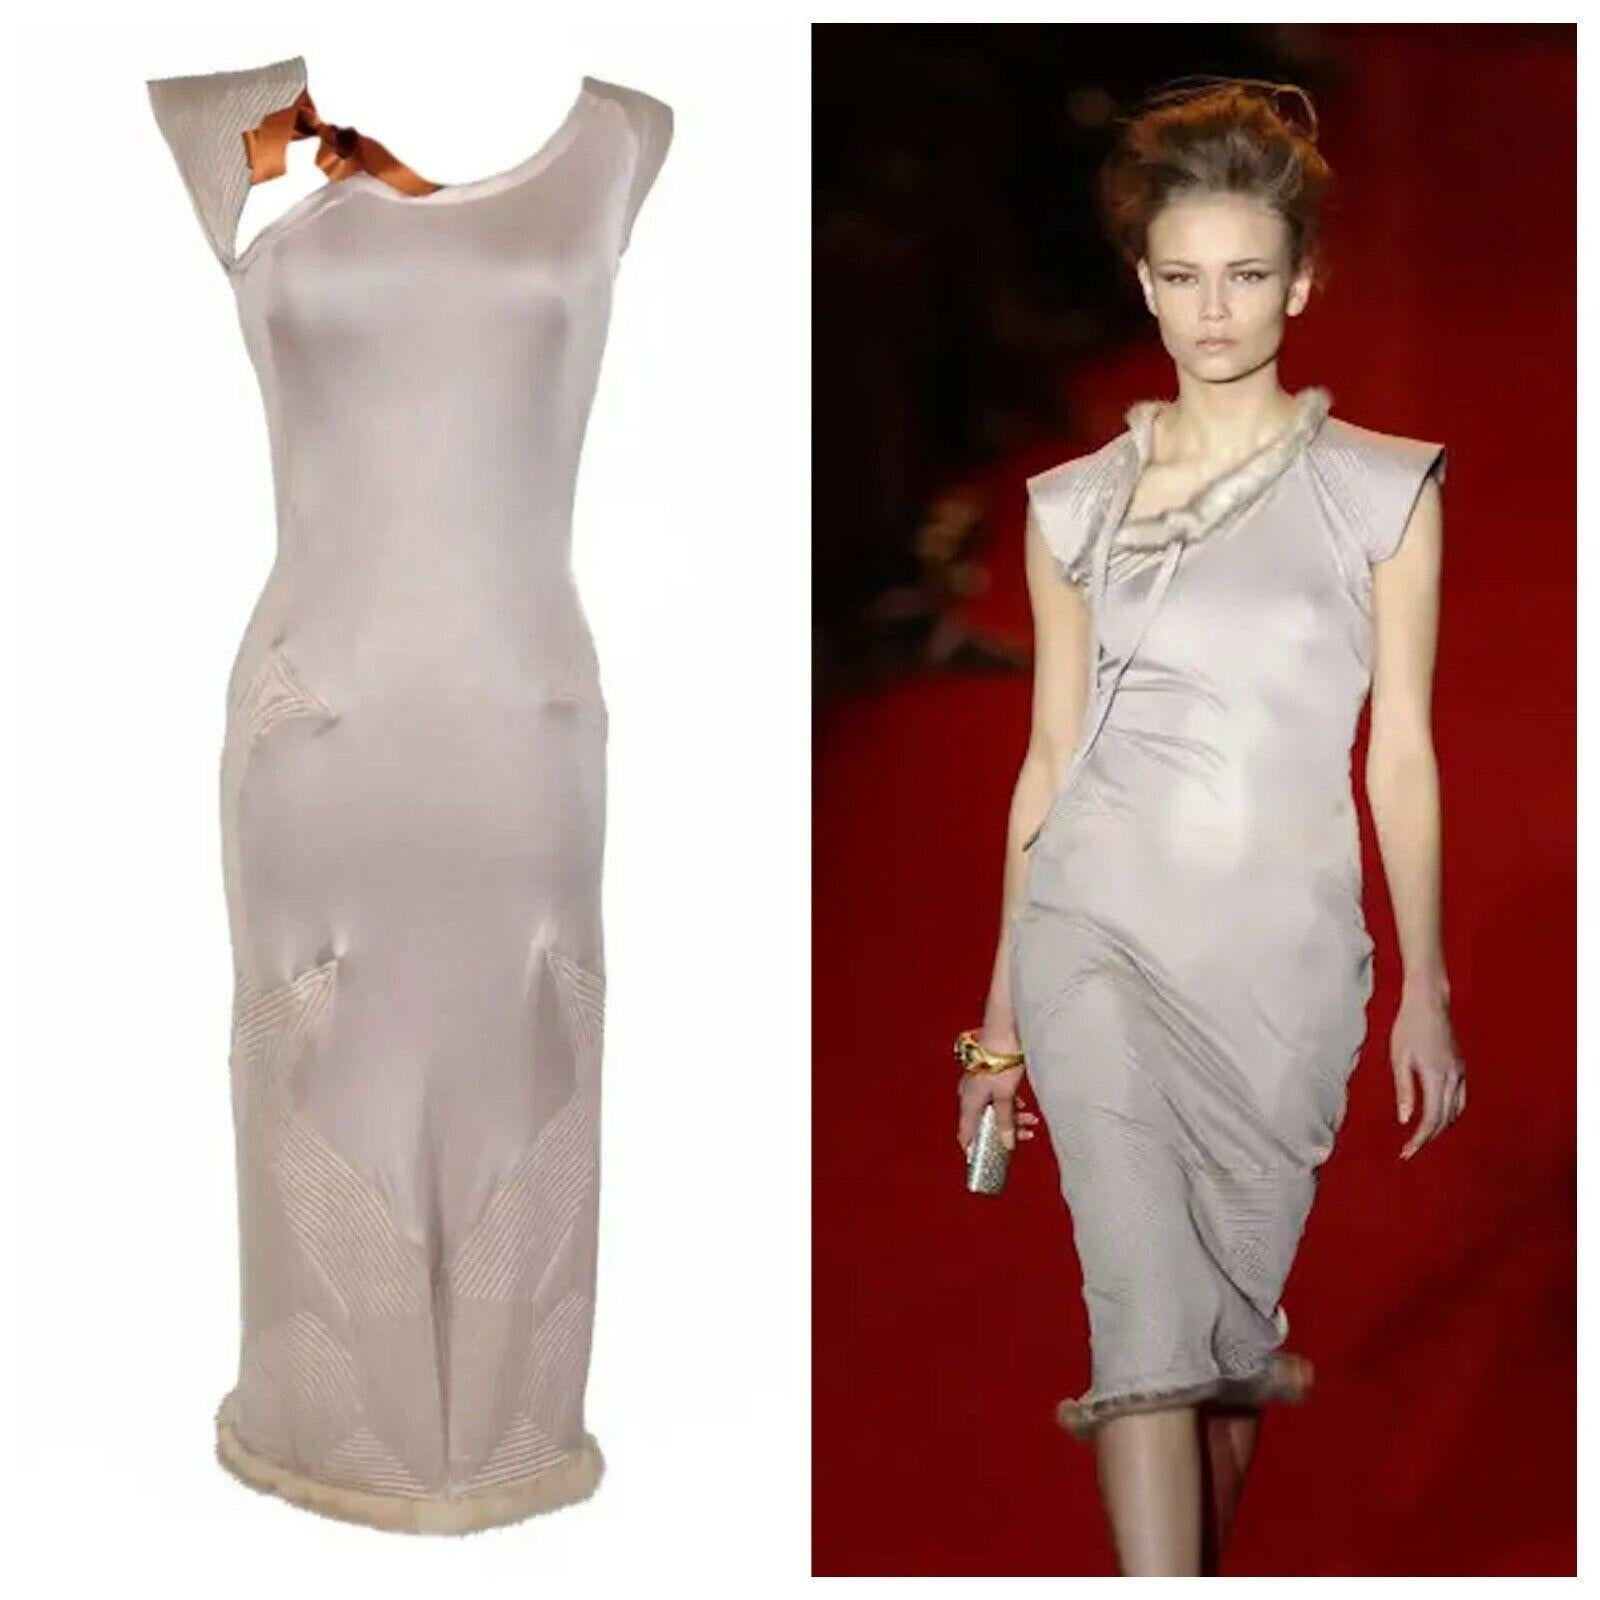 TOM FORD for YVES SAINT LAURENT DRESS
2004 Fall/Winter Collection.
Details:
Size: M
Color: Nude
Finished with delicate stitching, mink fur trim and silk ribbon. Length 47